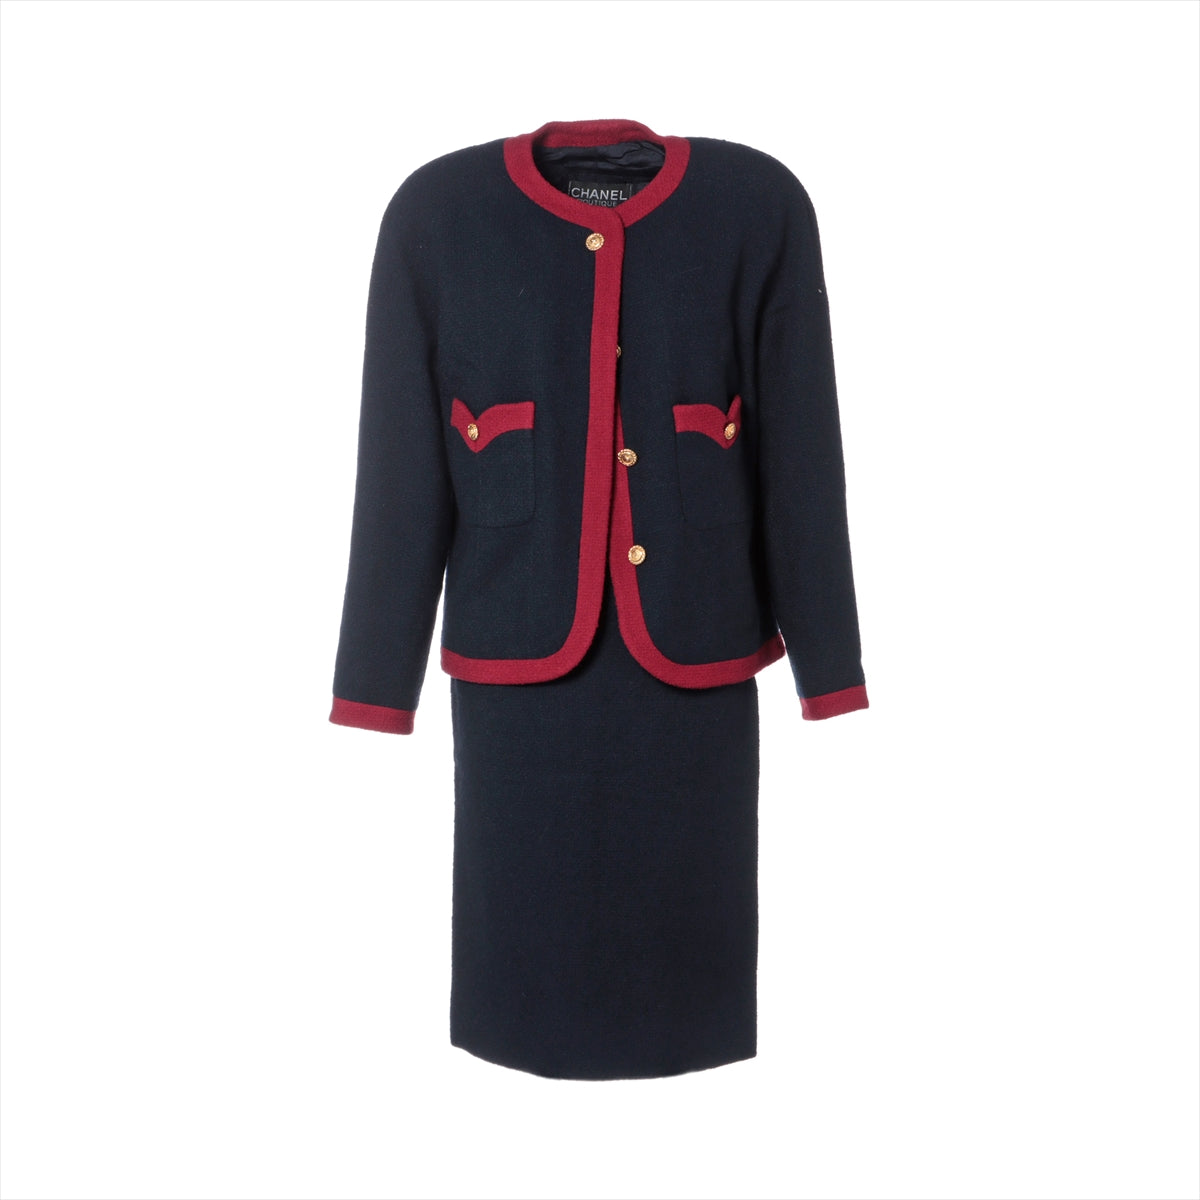 Chanel Coco Button Vintage Wool Setup 34 Ladies' Navy x red  20370 Bicolor Gold button